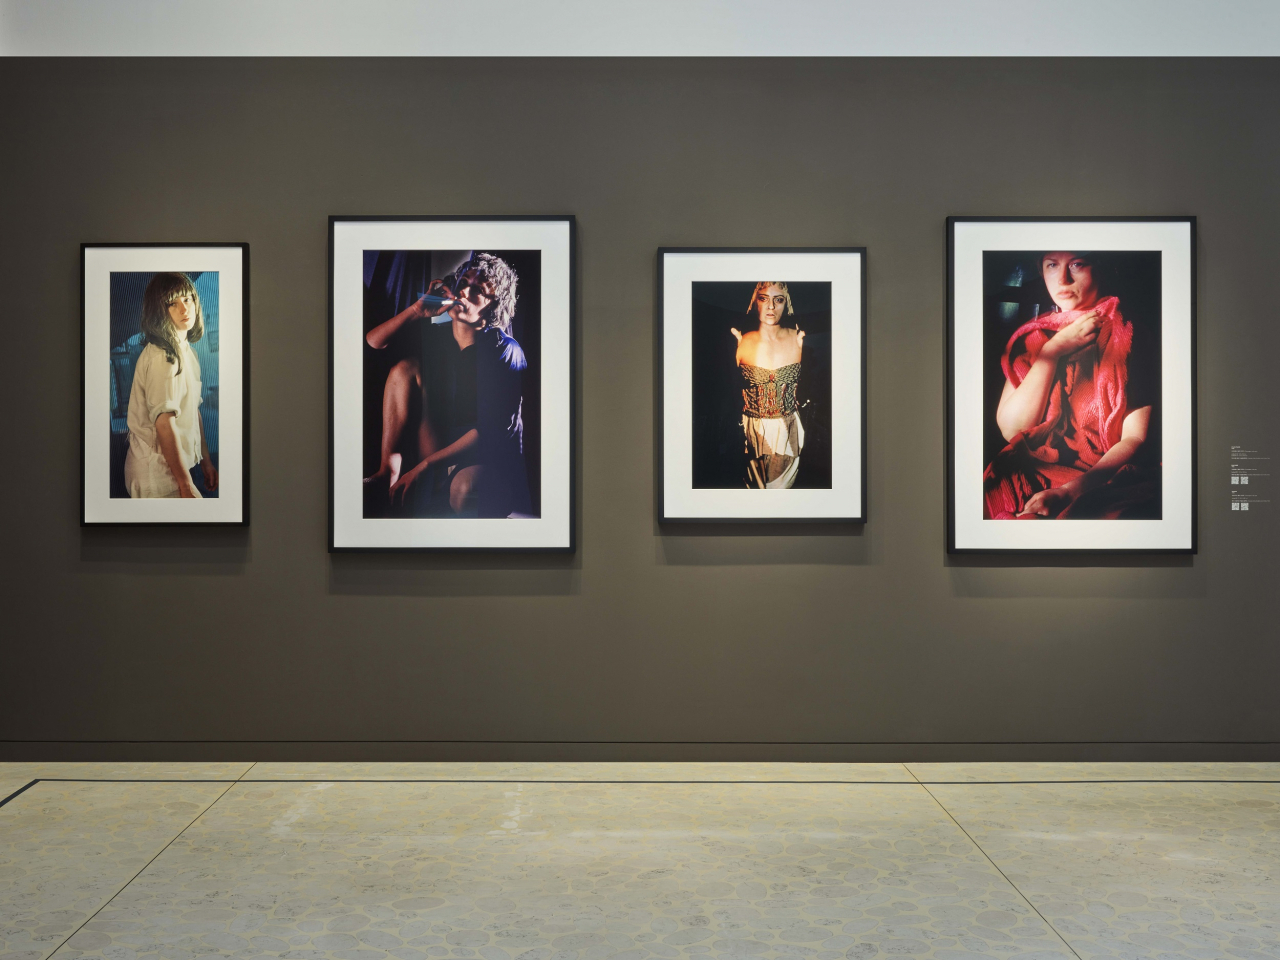 Why the Cindy Sherman retrospective at the Fondation Louis Vuitton